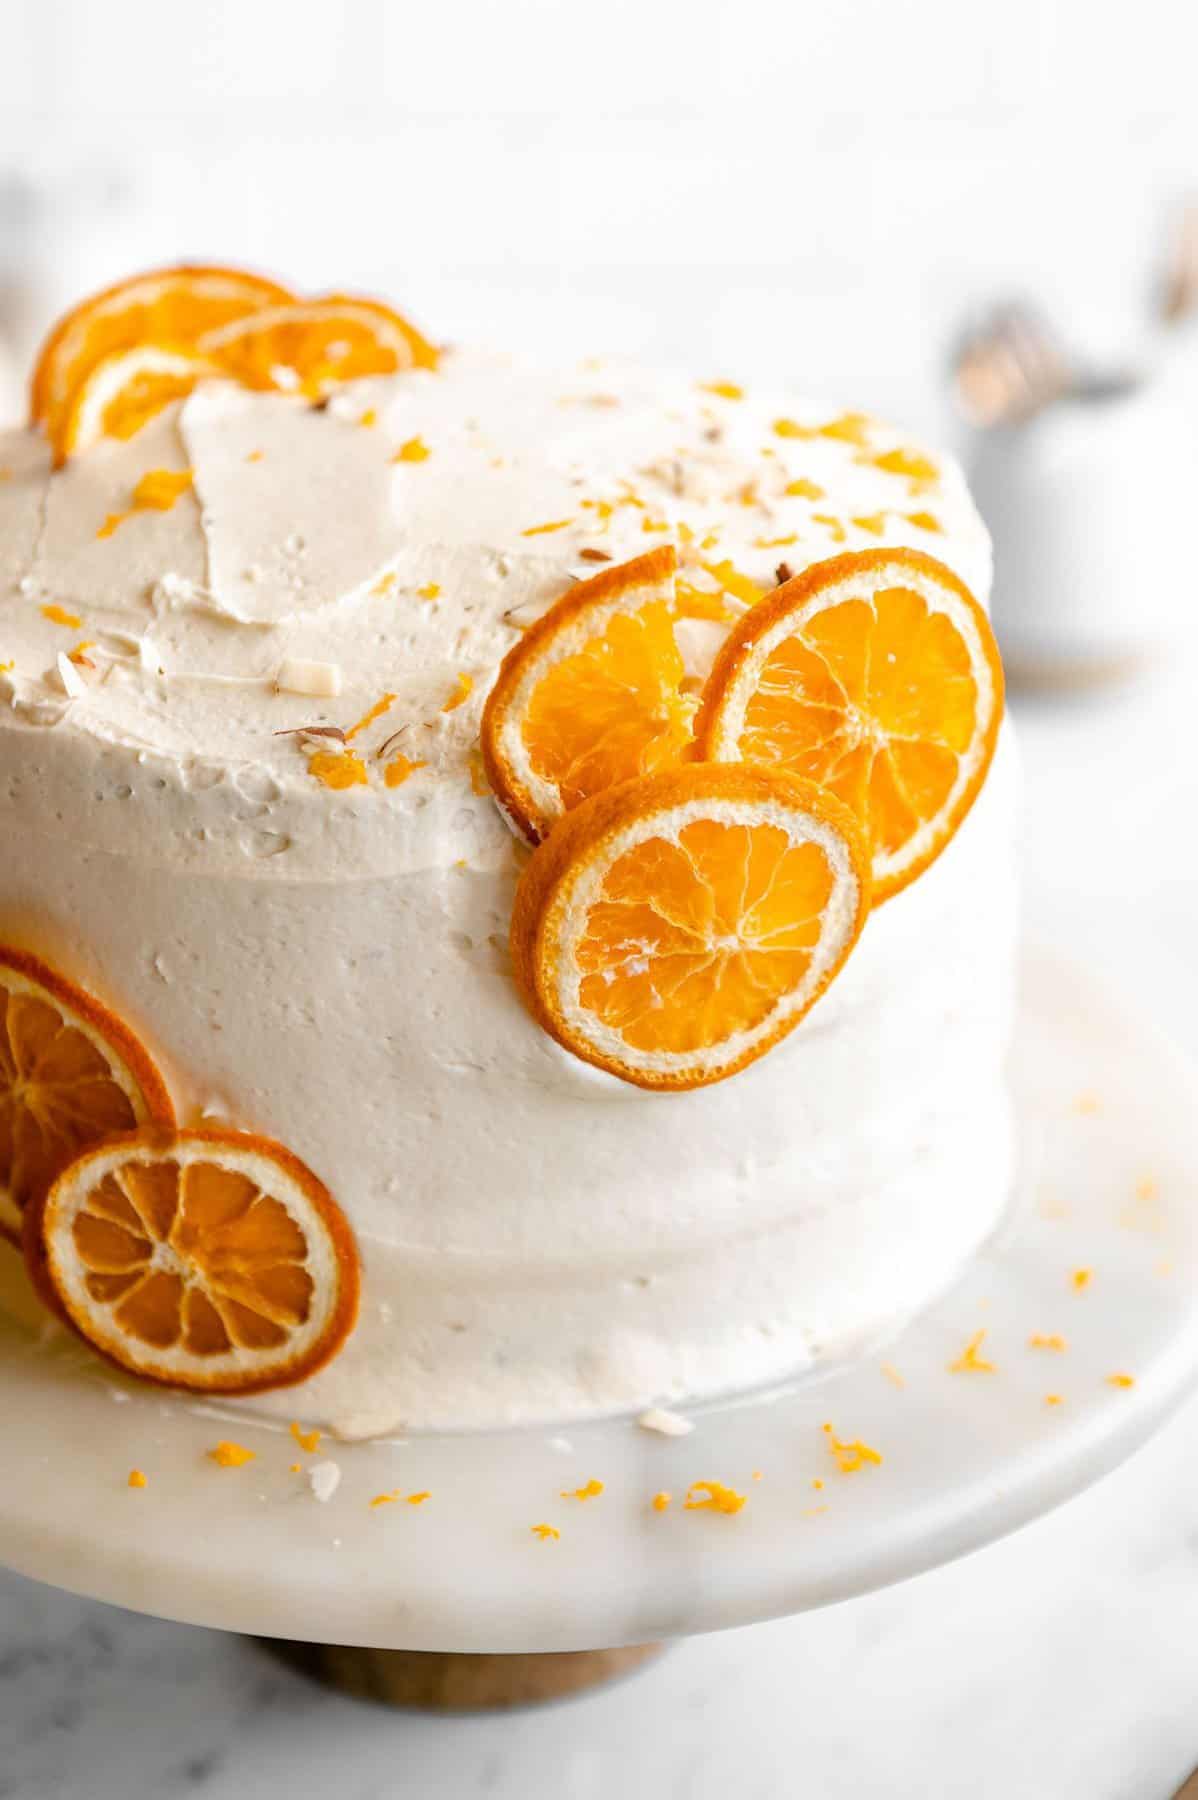 angled view of the cake with fresh orange slices